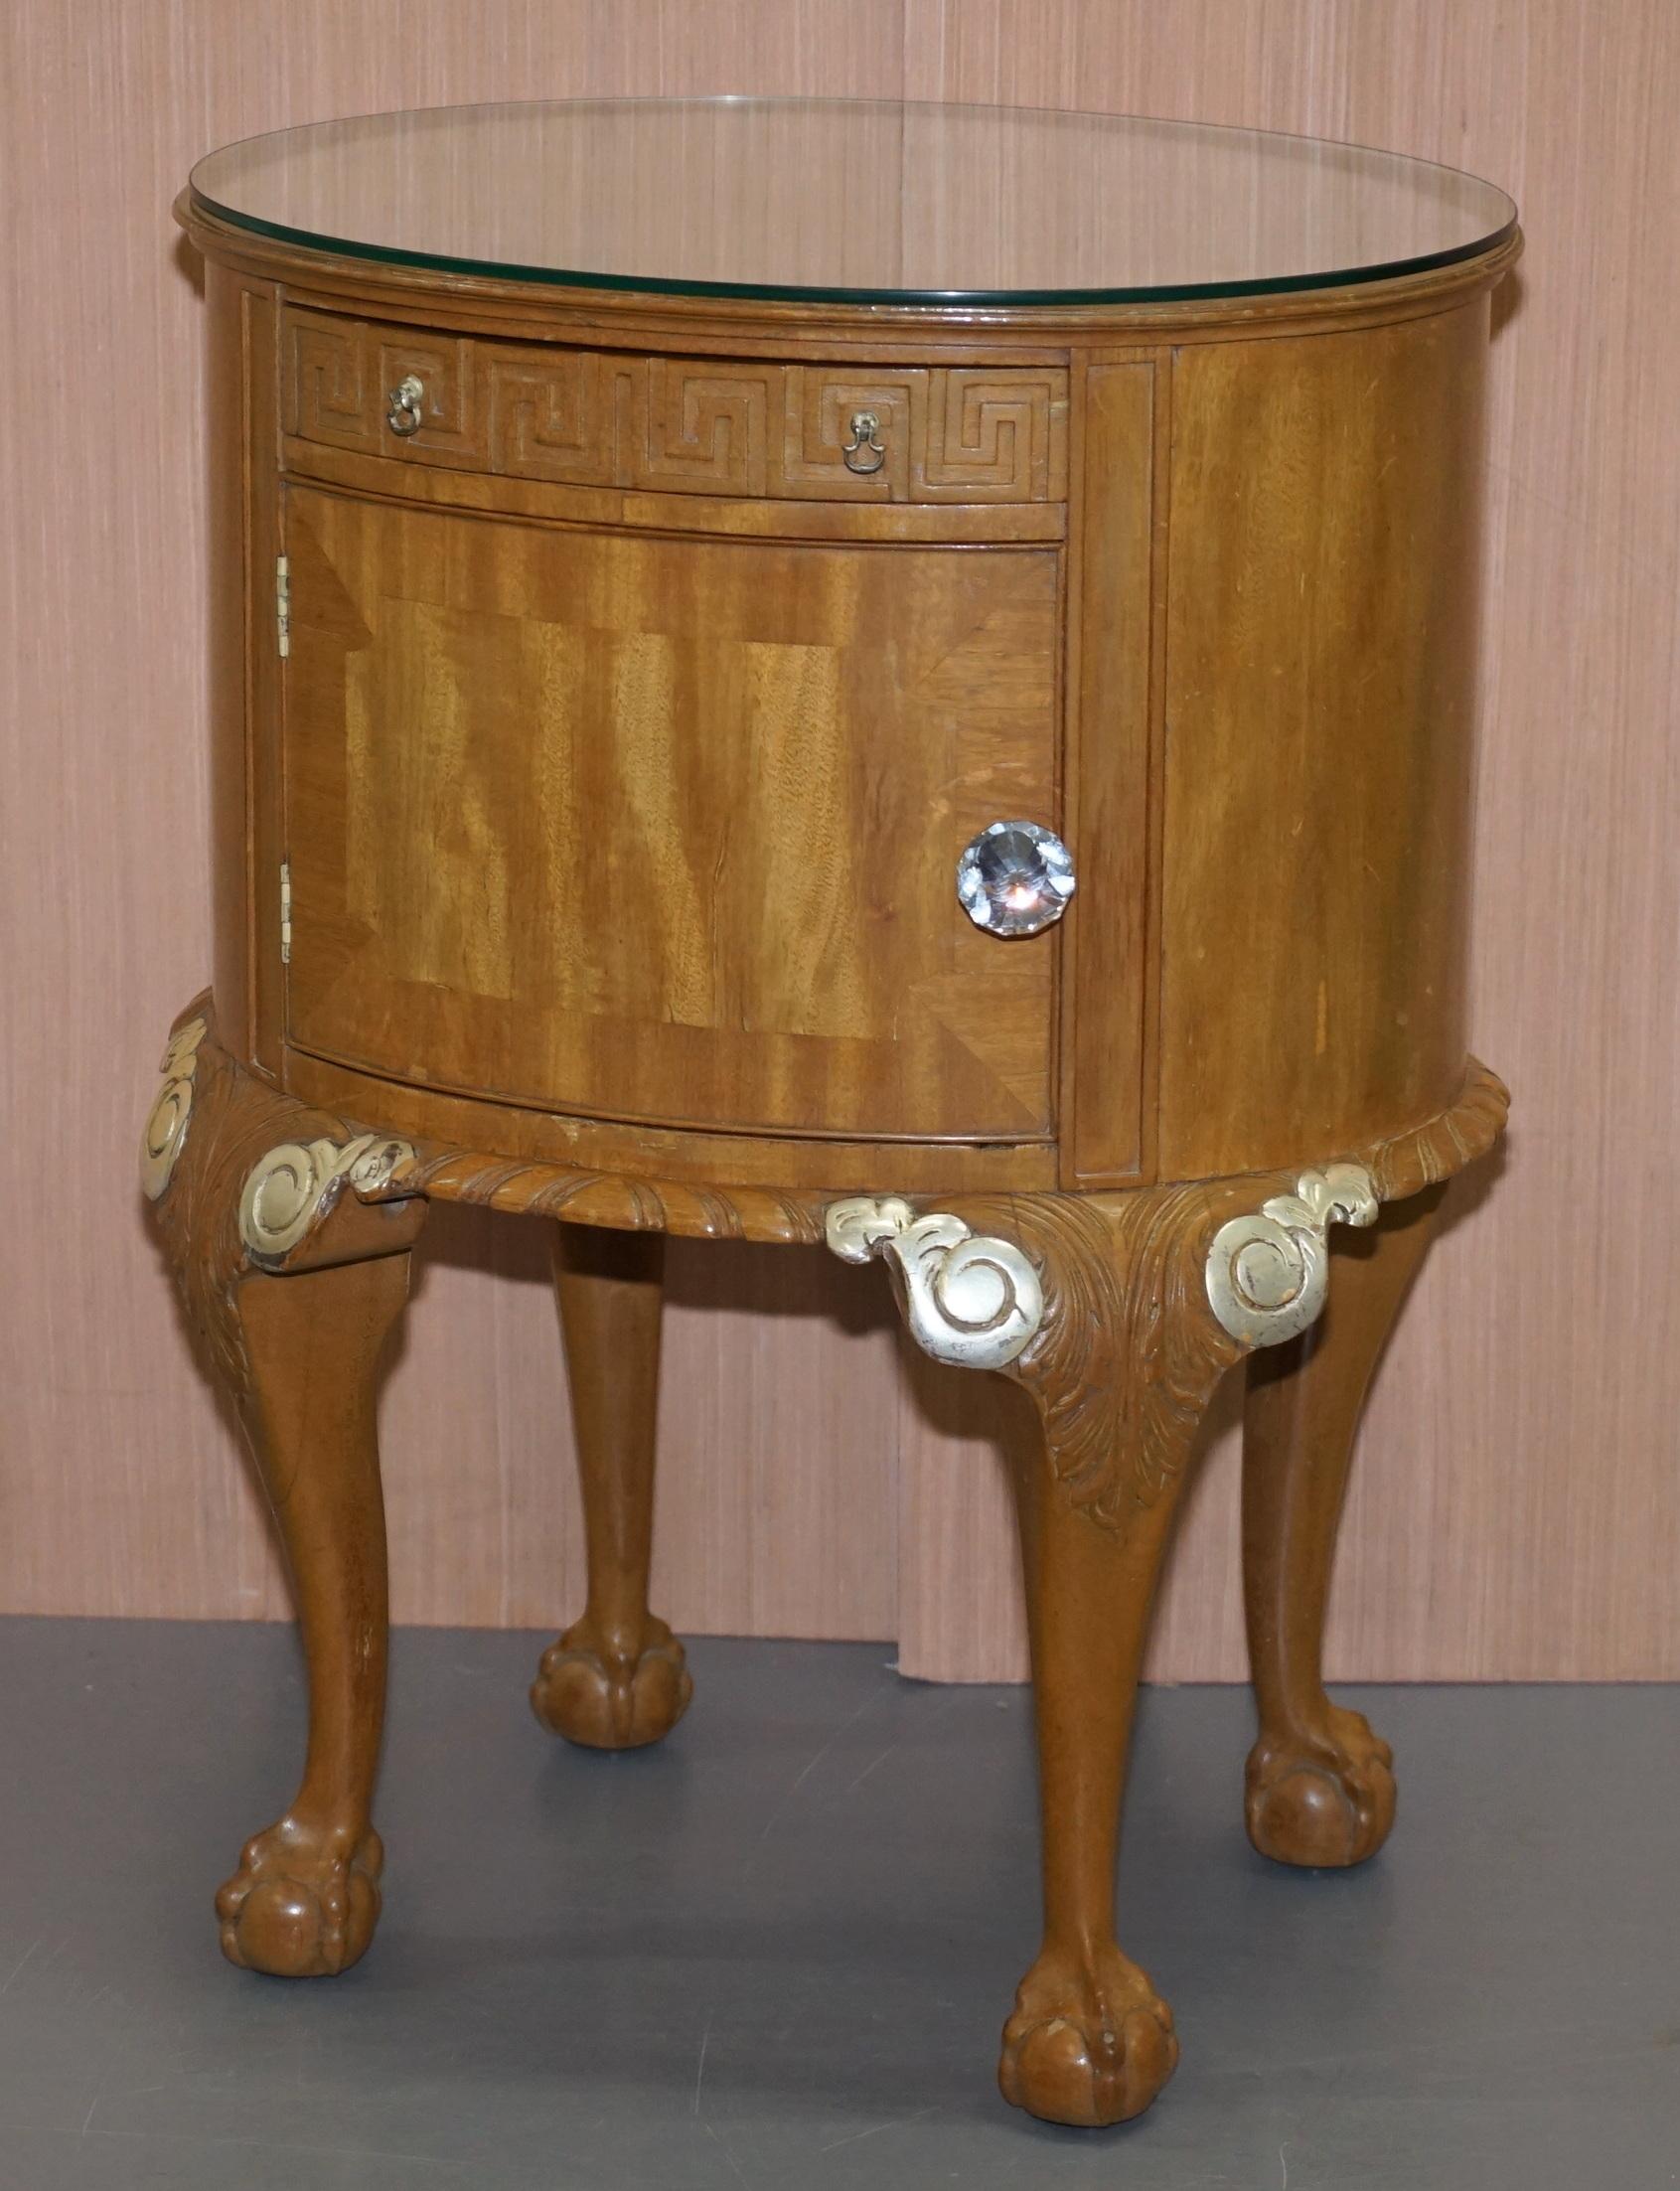 We are delighted to offer for sale this lovely pair of Gillows walnut bedside tables with ornately carved claw and ball legs

As mentioned these are part of a suite, I have the matching chest of drawers and a stunning dressing table listed under